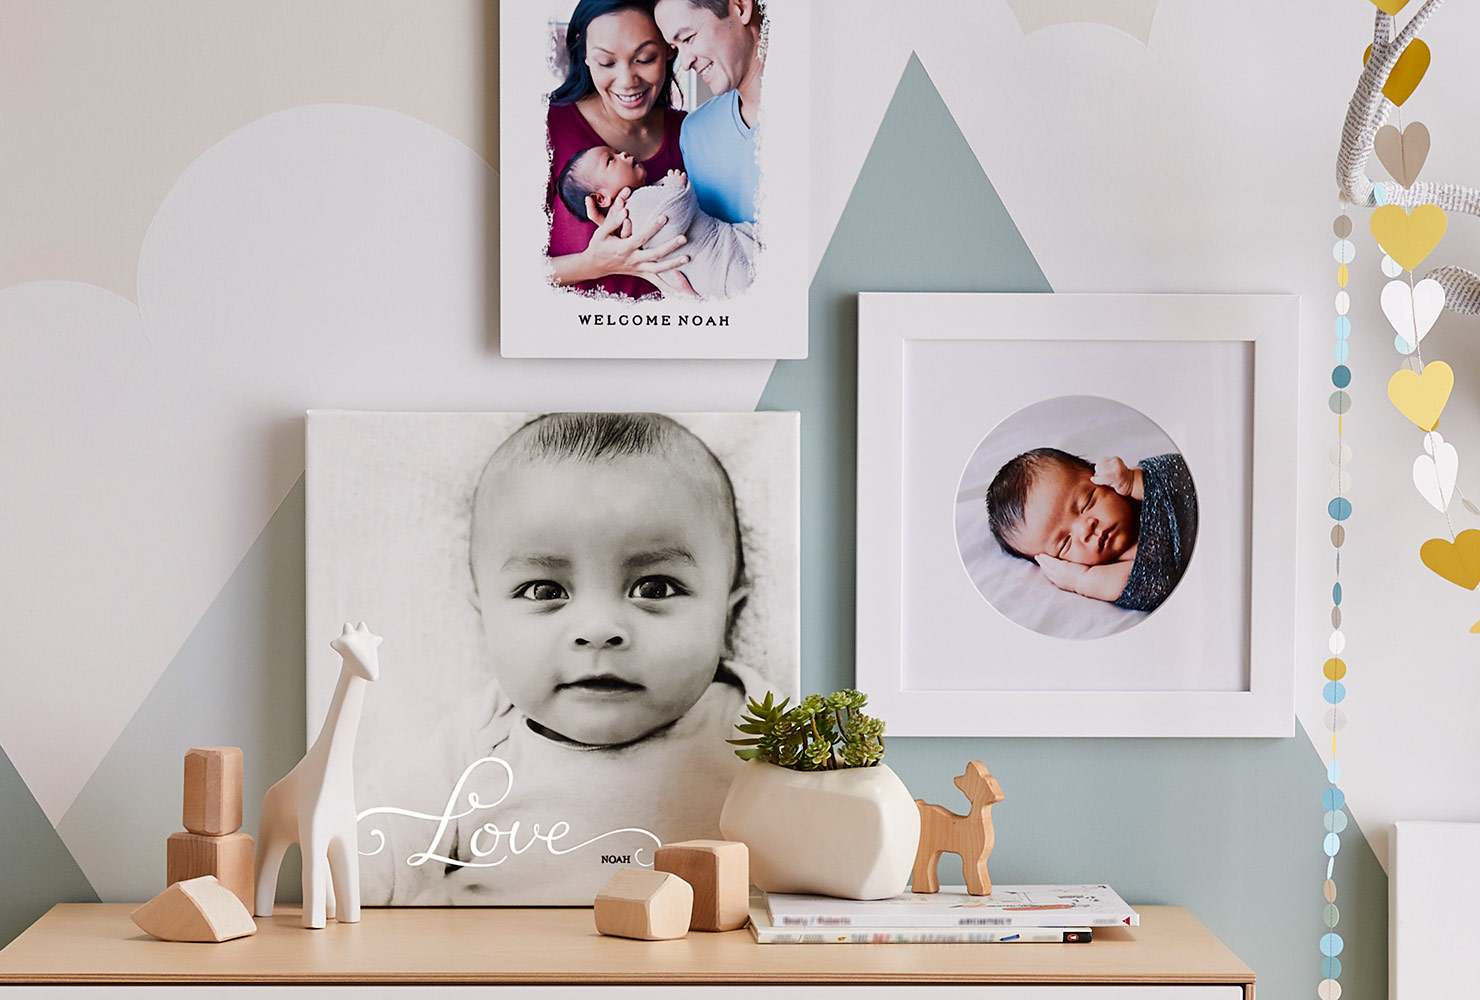 Newborn photo prints in nursery with colorful decor